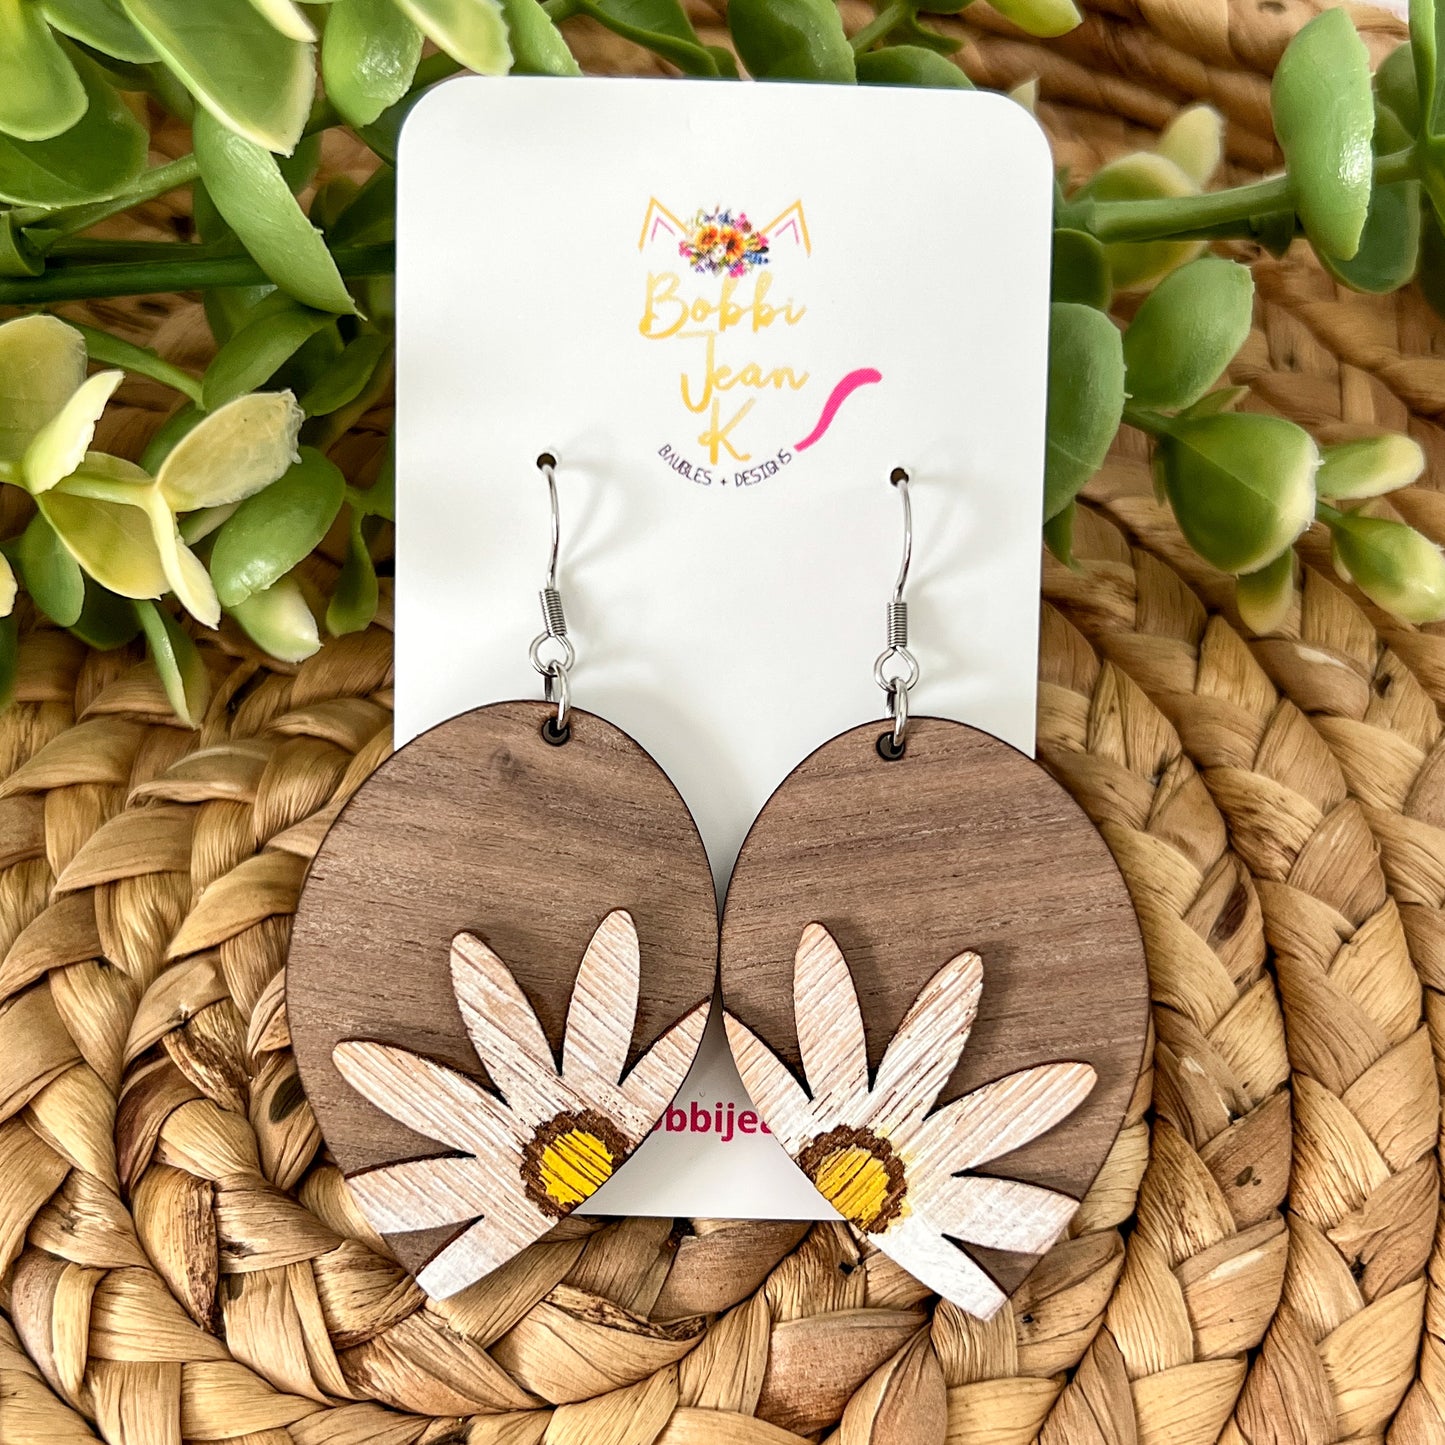 Distressed Daisy Hand Painted 3D Walnut Wood Inverted Teardrop Earrings:  Choose From 2 Size Options